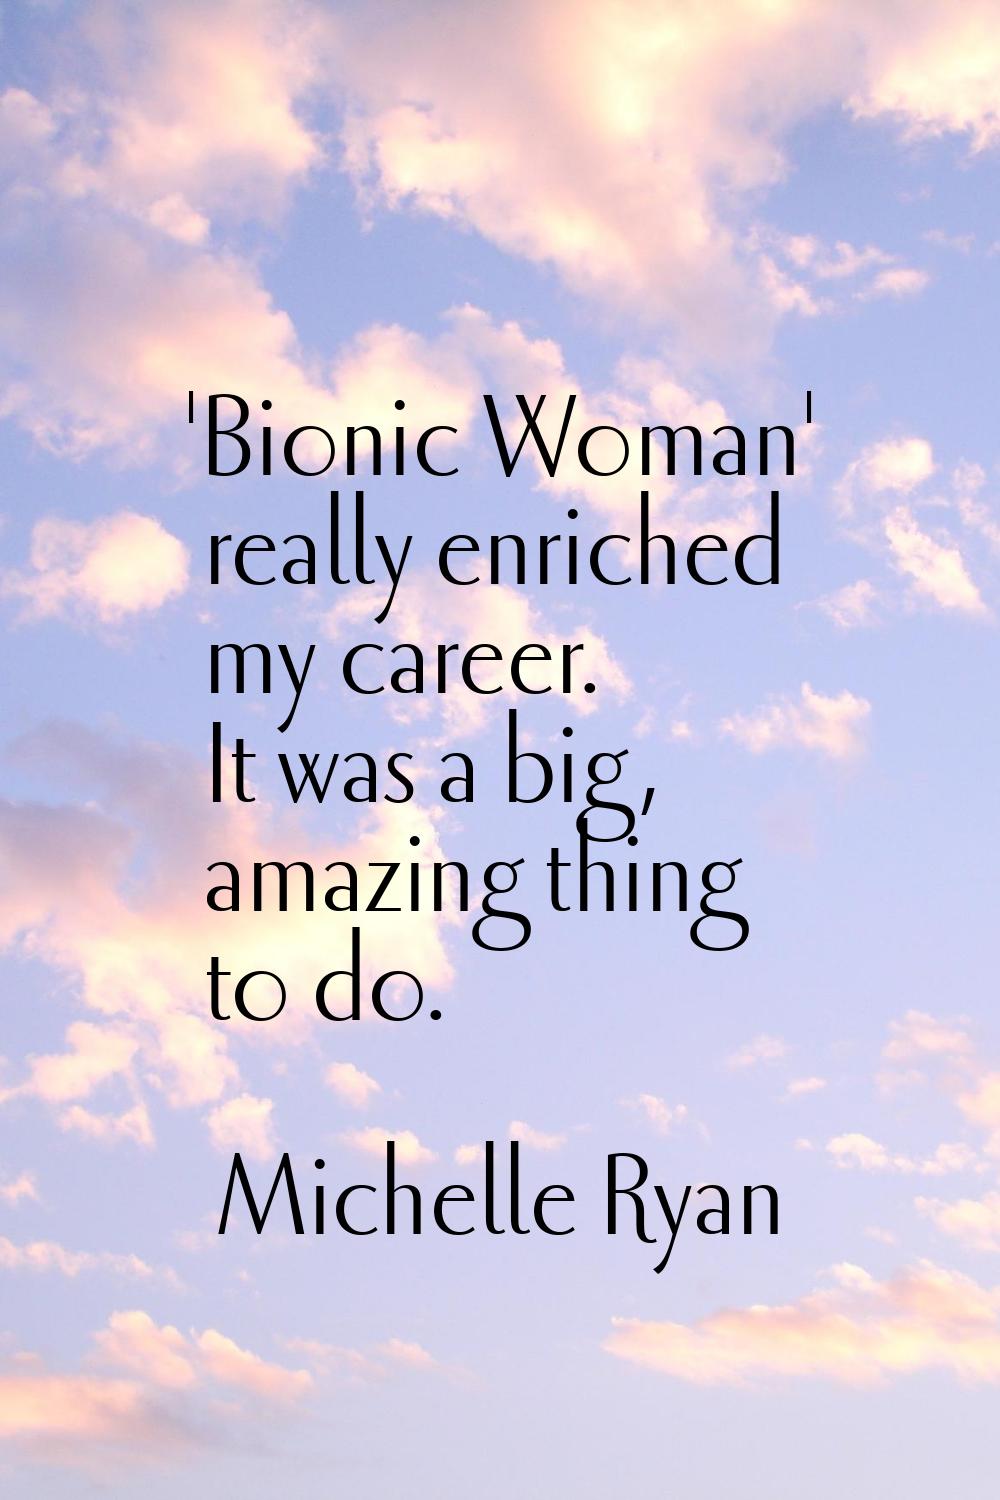 'Bionic Woman' really enriched my career. It was a big, amazing thing to do.